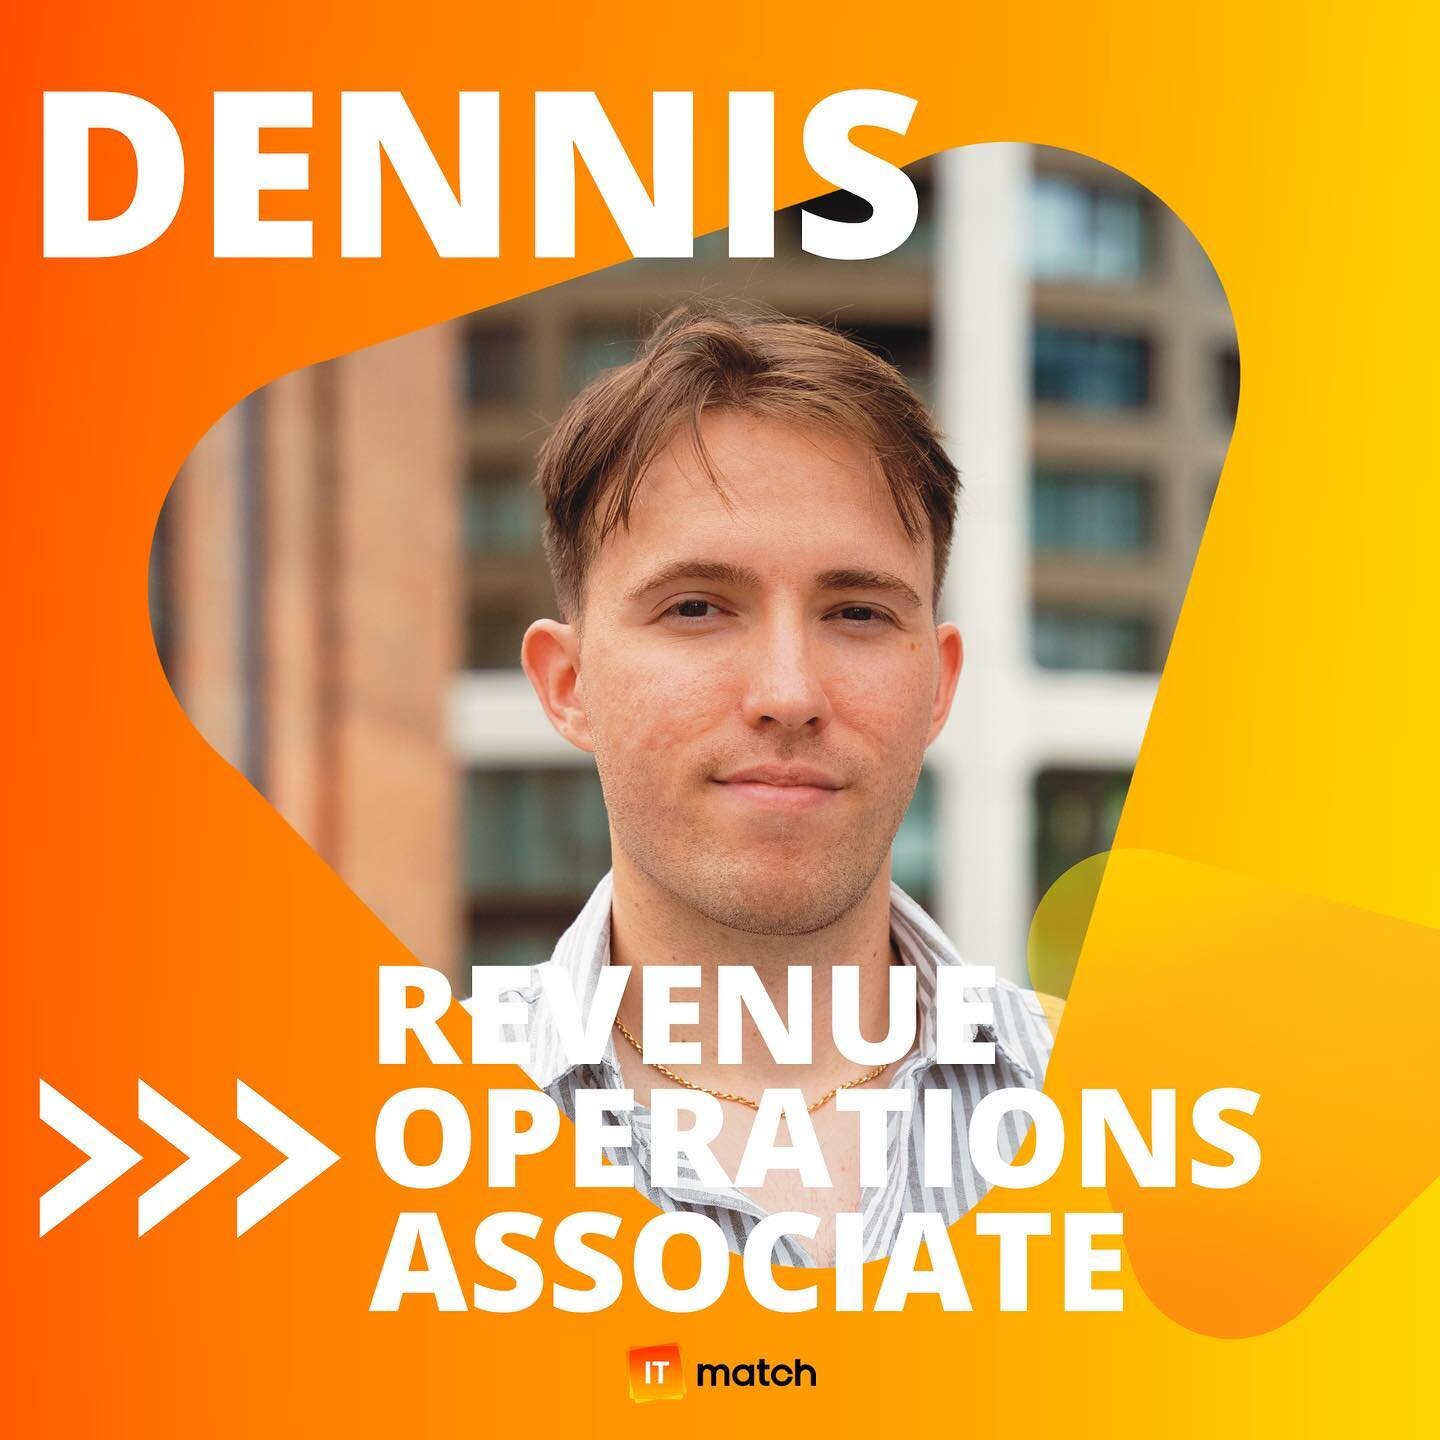 Dennis works at ITmatch as a Revenue Operations Associate and
Executive Assistant while also being actively involved in marketing and managing the company's social media presence. In his free time, he loves expressing his creative side through art an